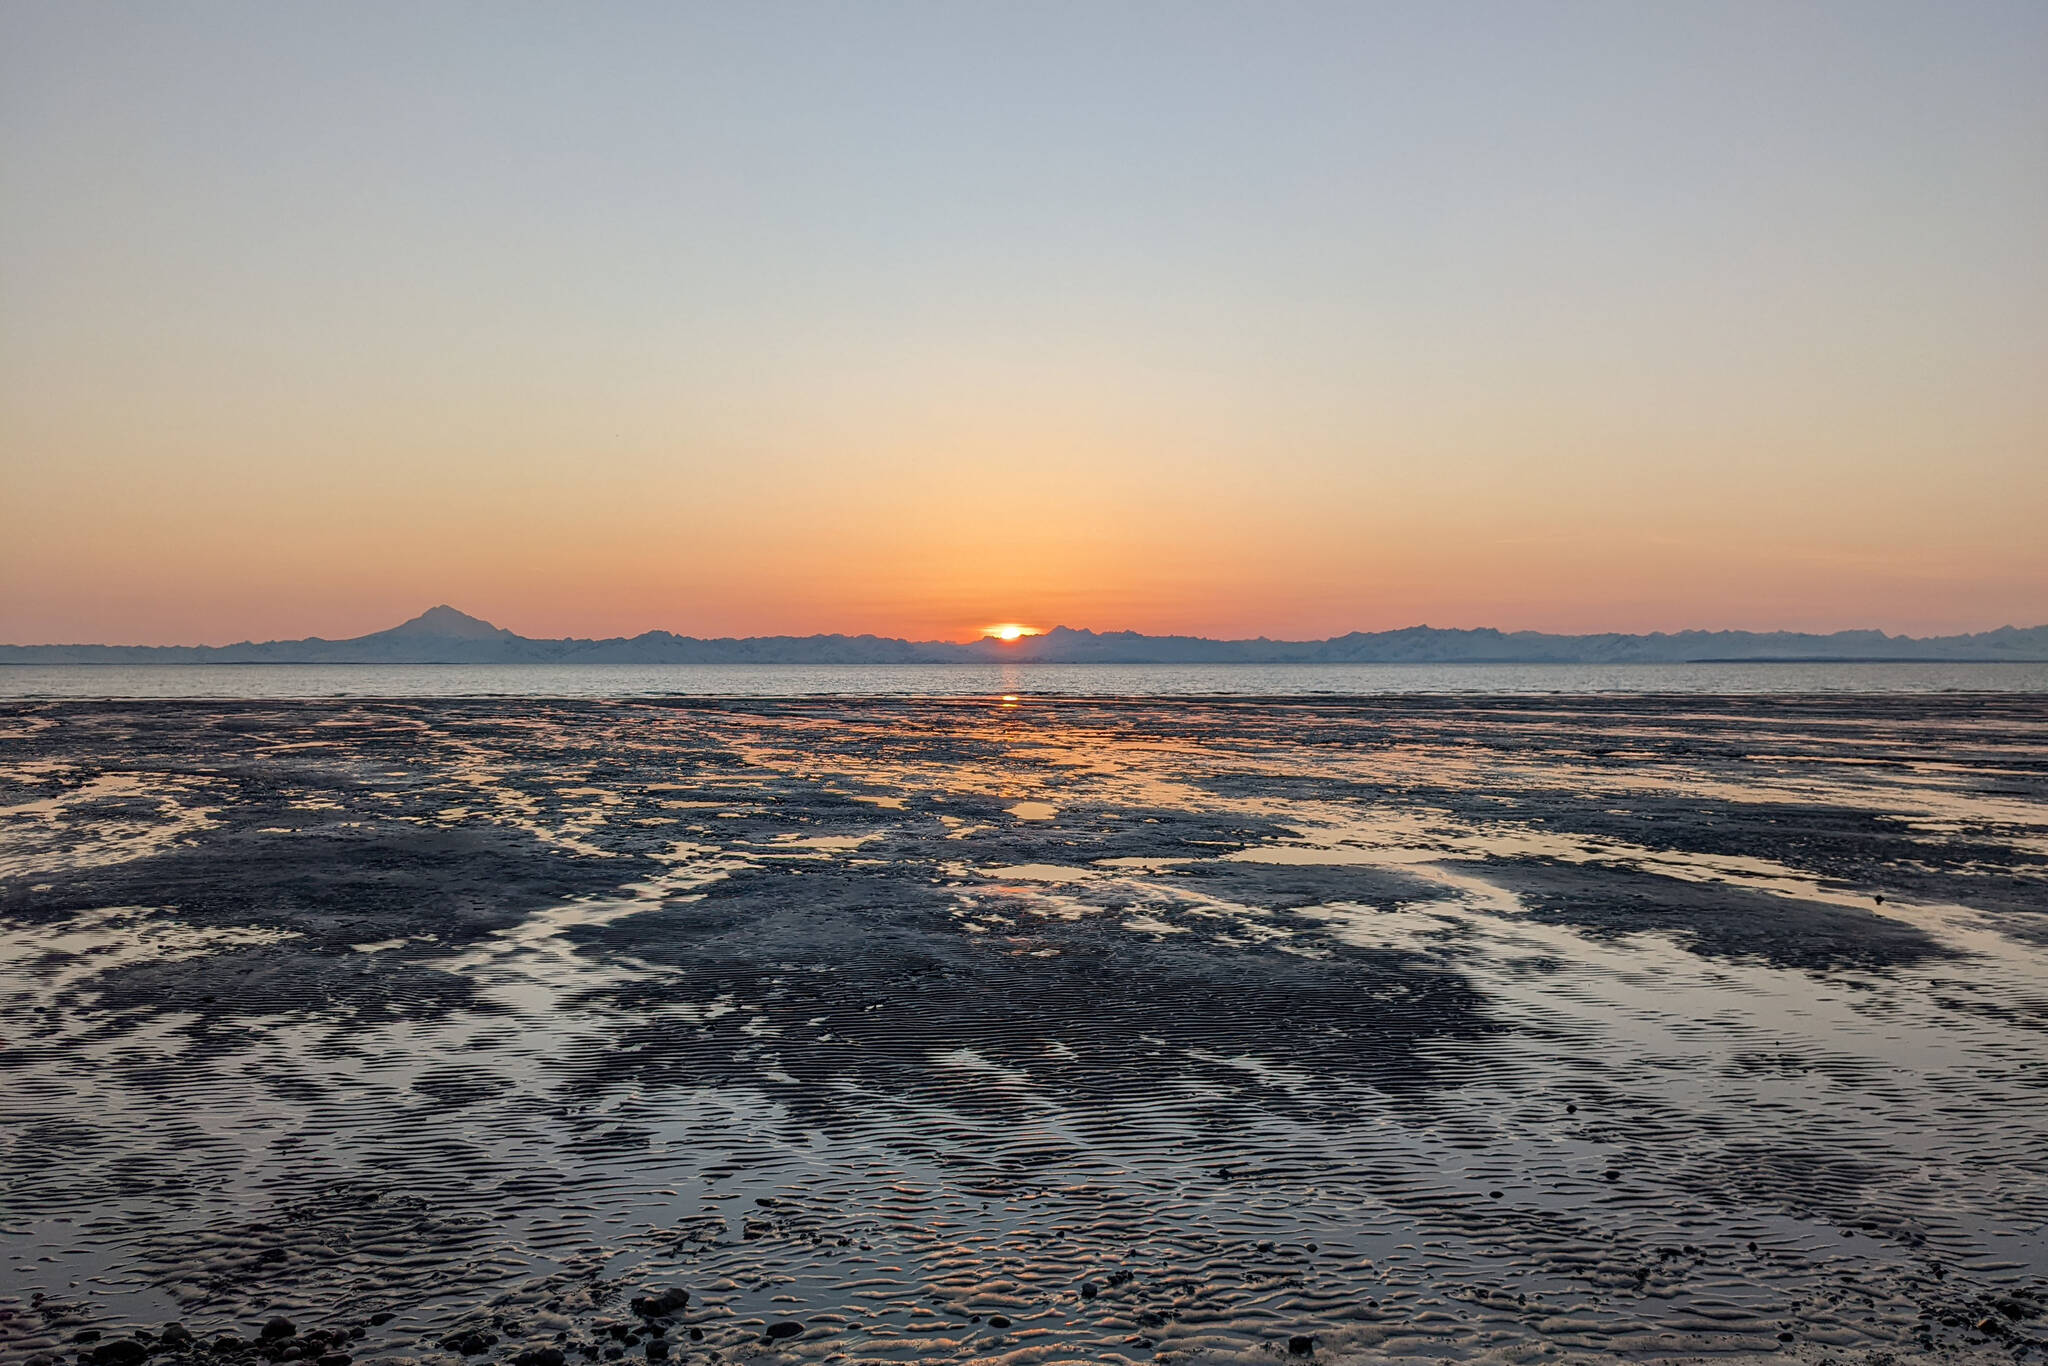 Mount Redoubt volcano can be seen across Cook Inlet from the shores of South Kenai Beach, in Kenai, Alaska, on April 10, 2022. (Photo by Erin Thompson/Peninsula Clarion)